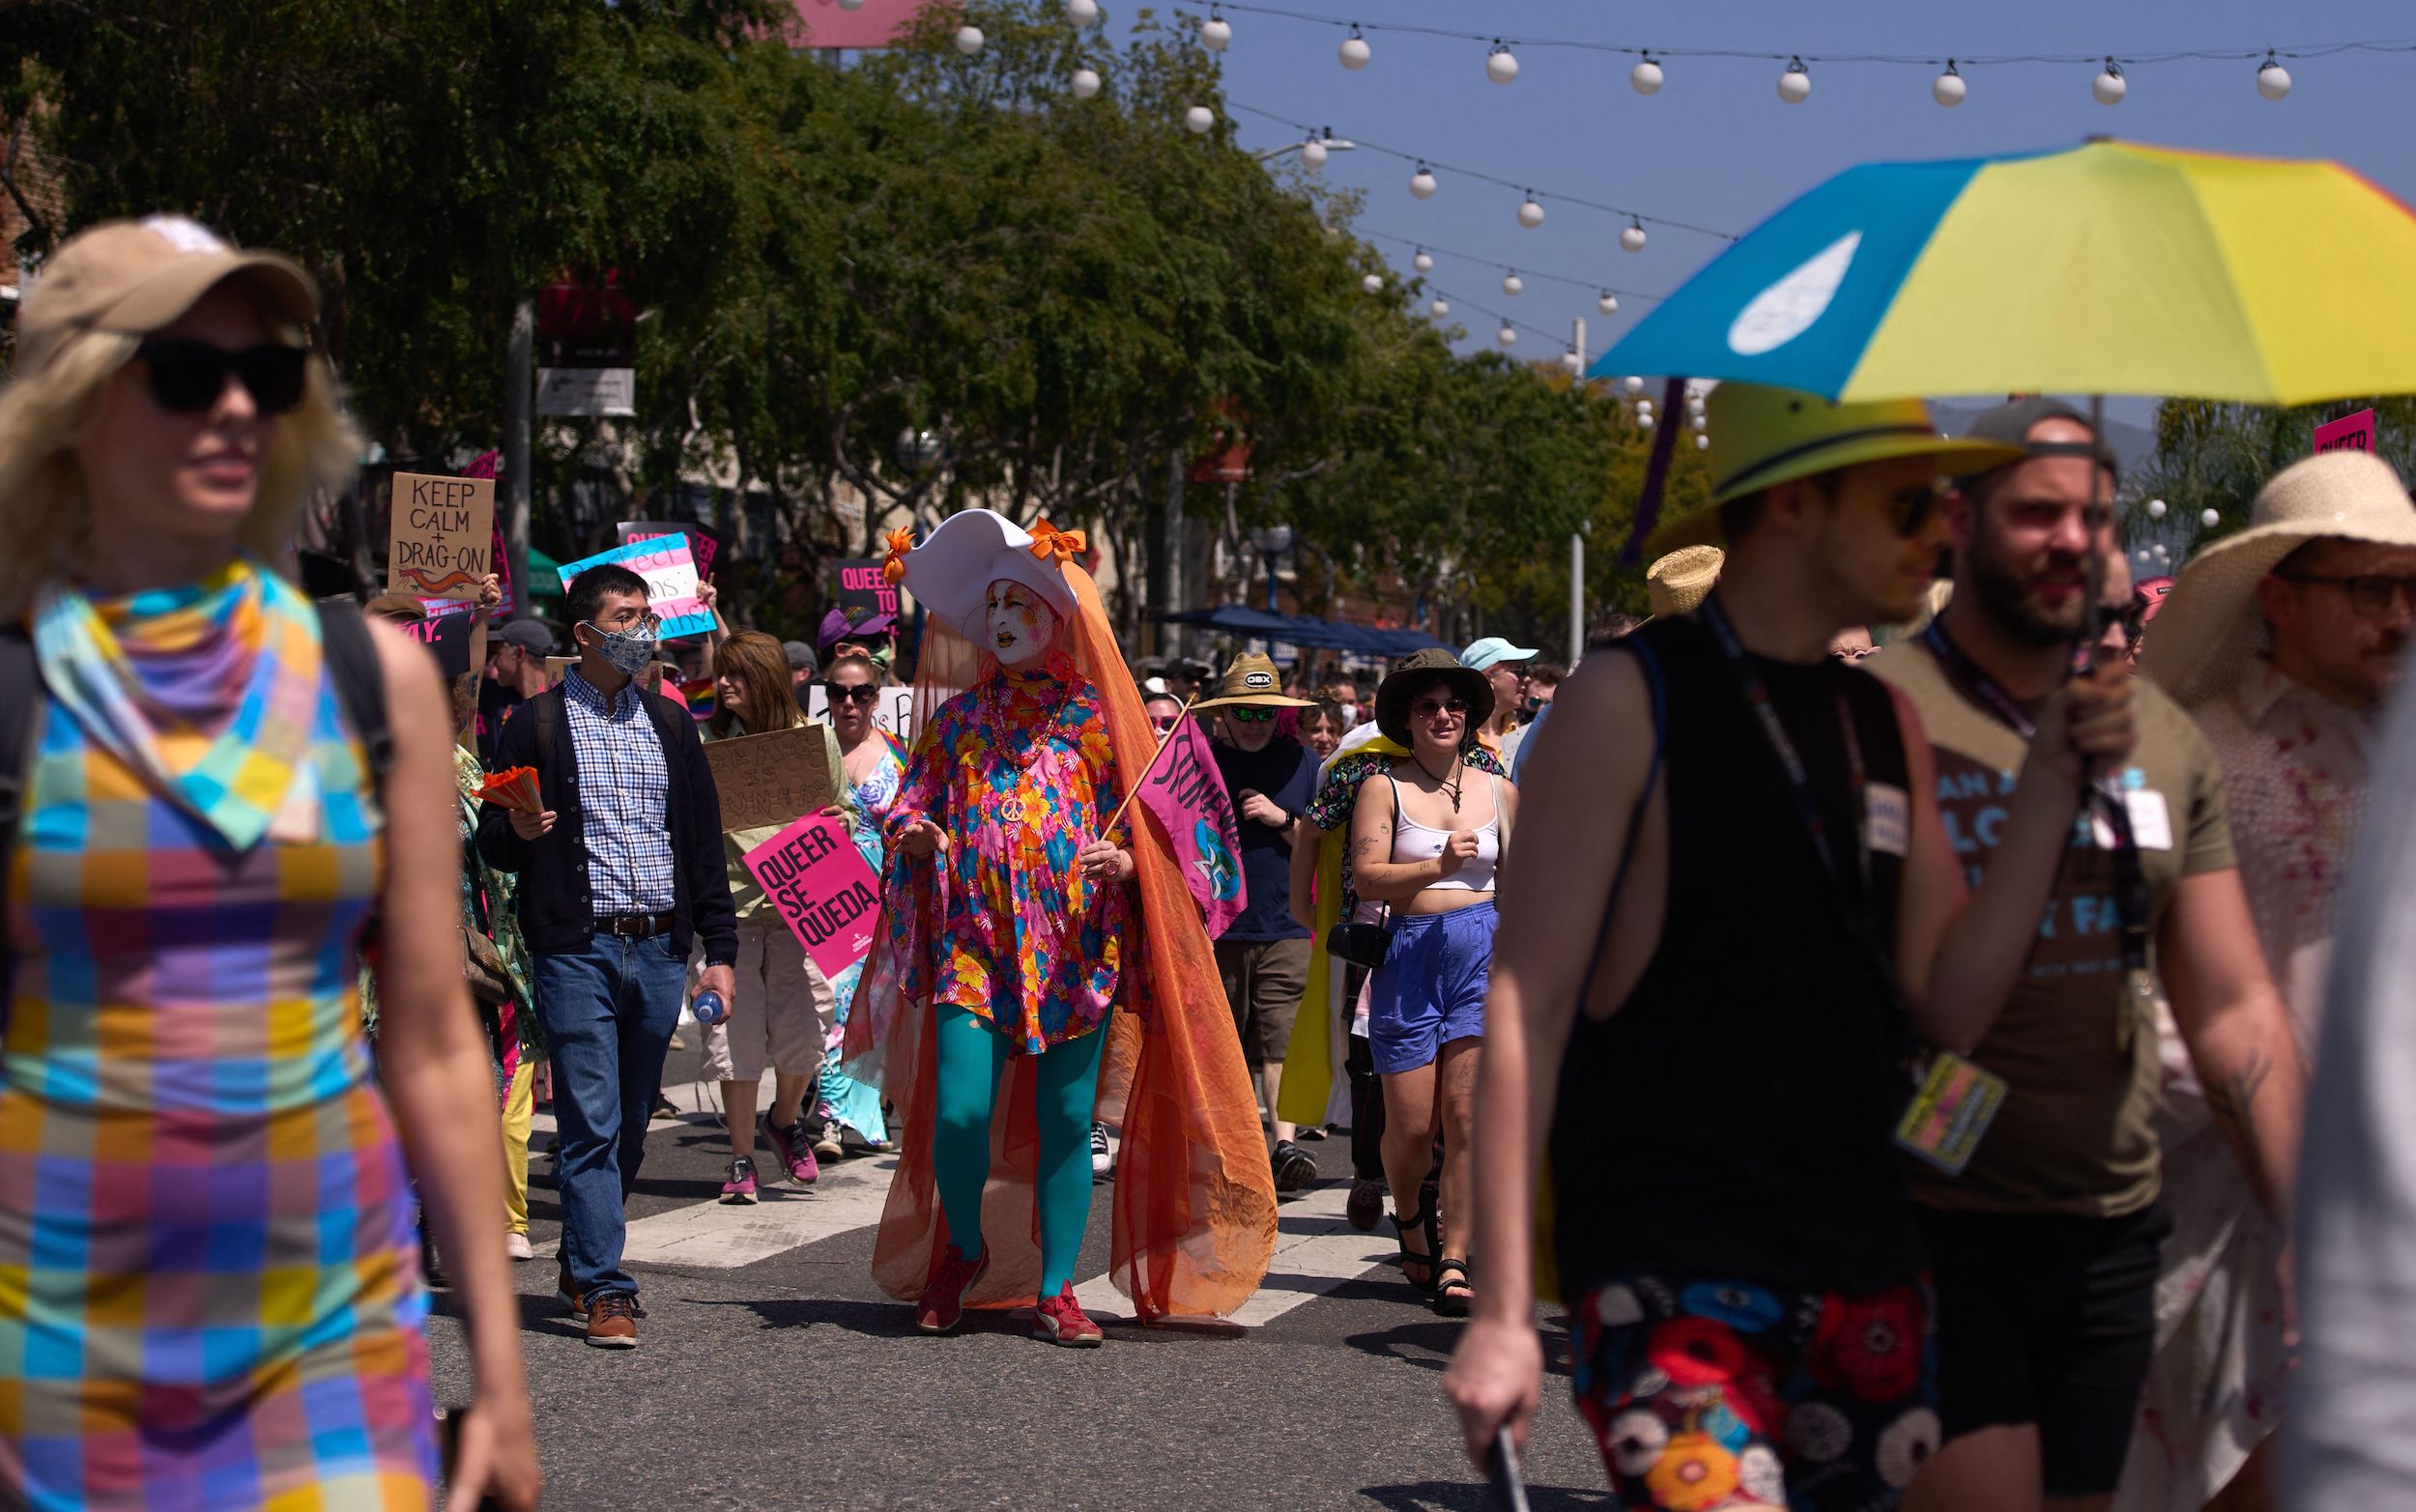 A member of the Los Angeles Sisters of Perpetual Indulgence participates in a Pride event.